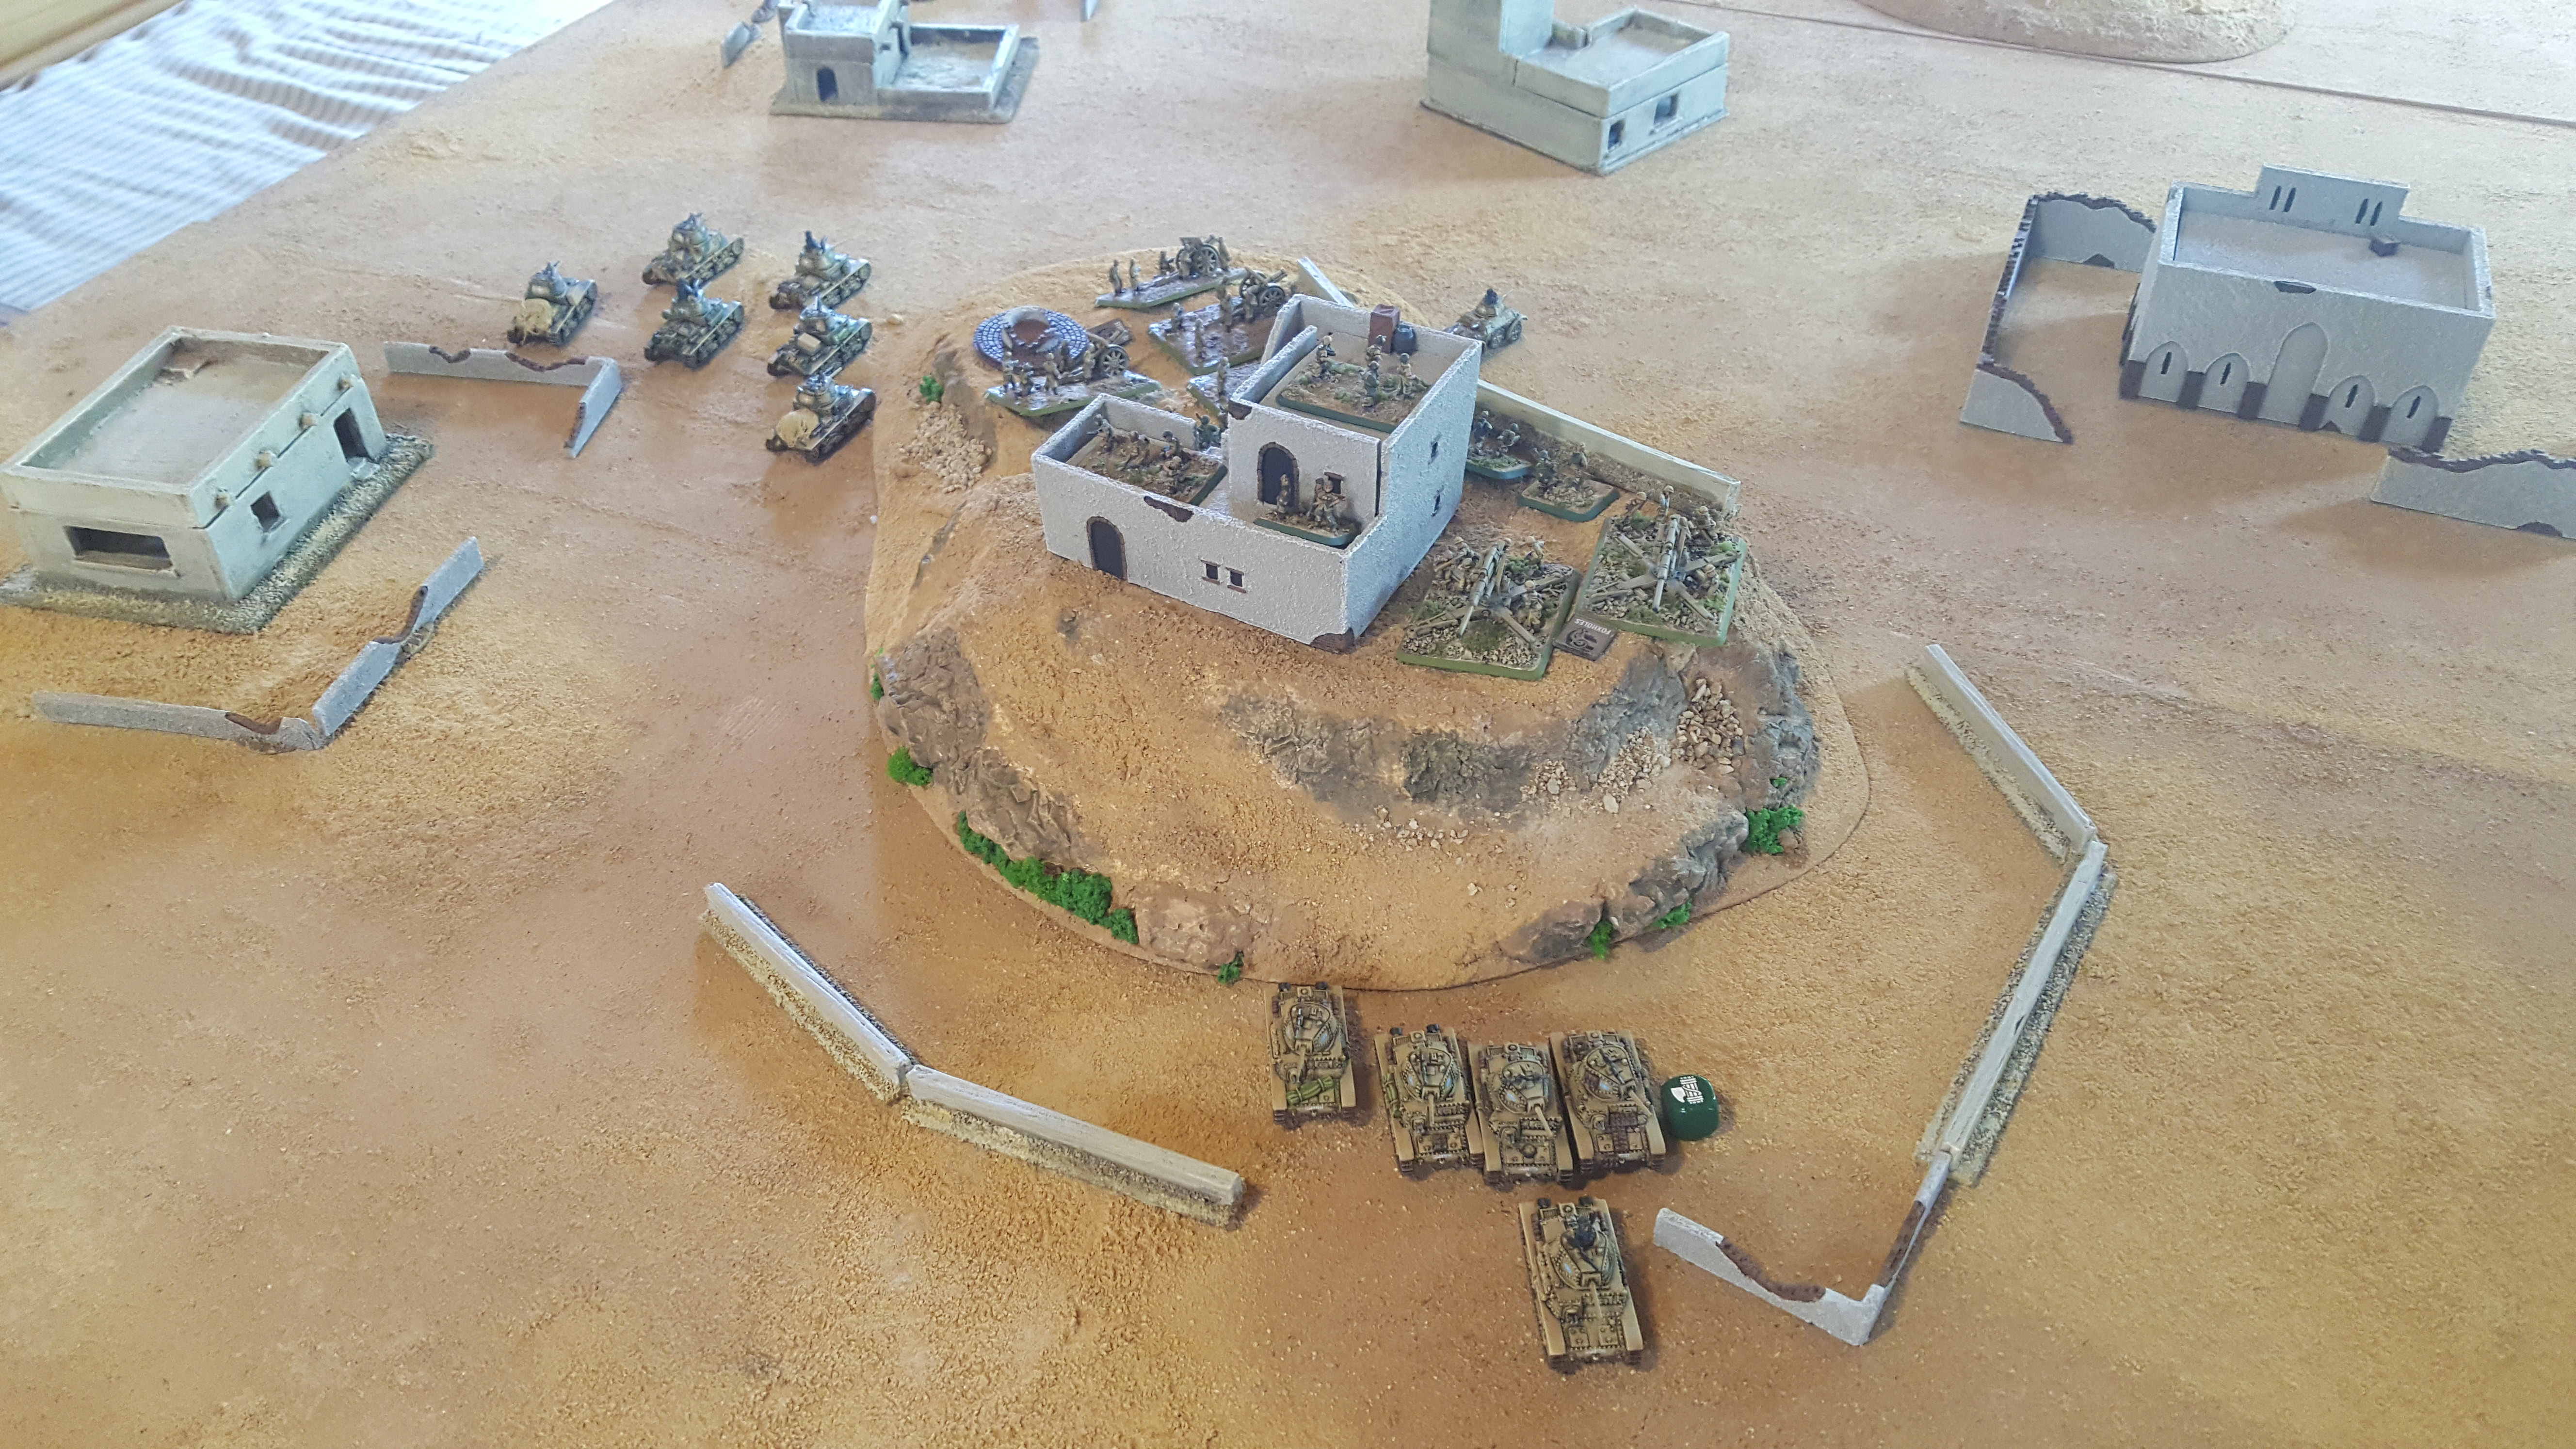 Red Devils In The Desert: A Battle Report